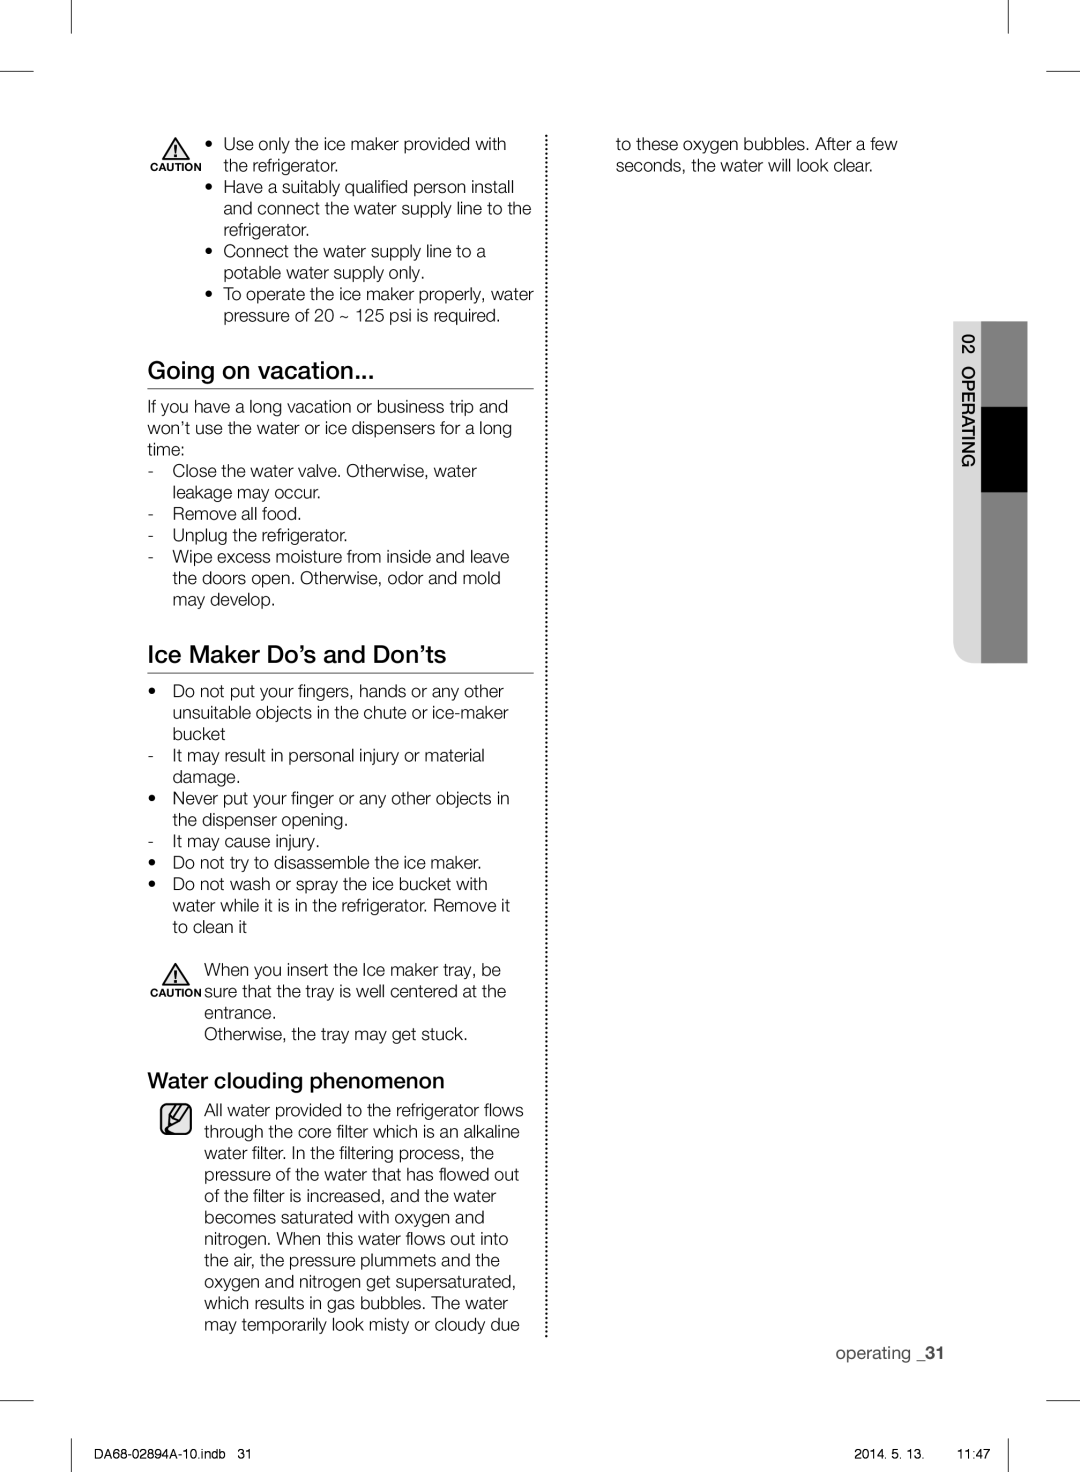 Samsung RF31FMESBSR user manual Going on vacation, Ice Maker Do’s and Don’ts, Water clouding phenomenon, operating _31 